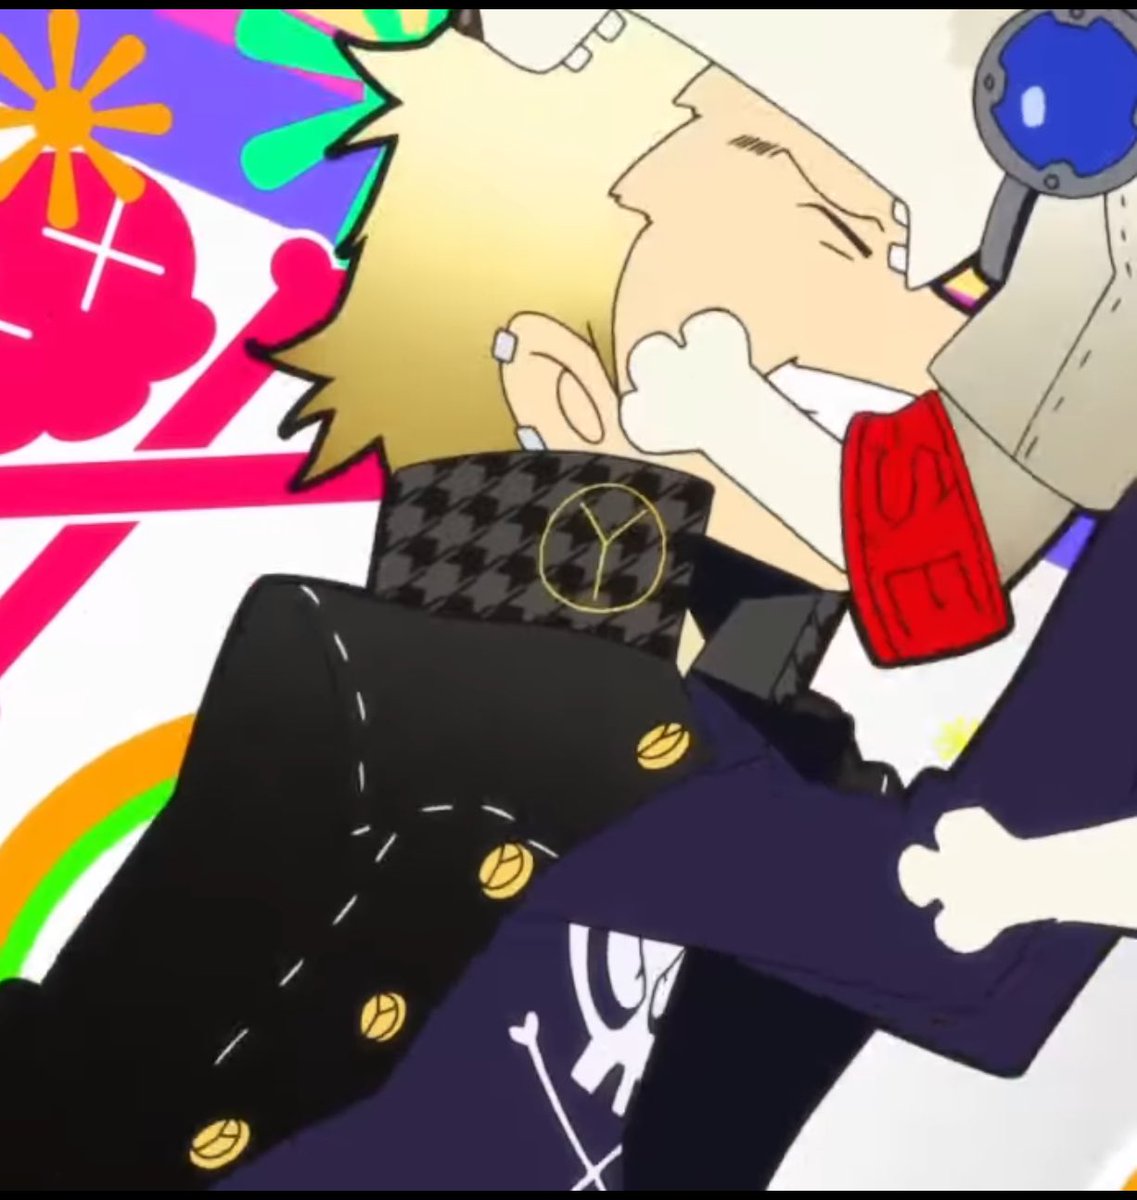 Just rewatched the persona Q opening AND HOLY SHIT I NEVER NOTICED THAT KOROMARU TAKES A FUCKING BITE OUT OF KANJI’S CRANIUM